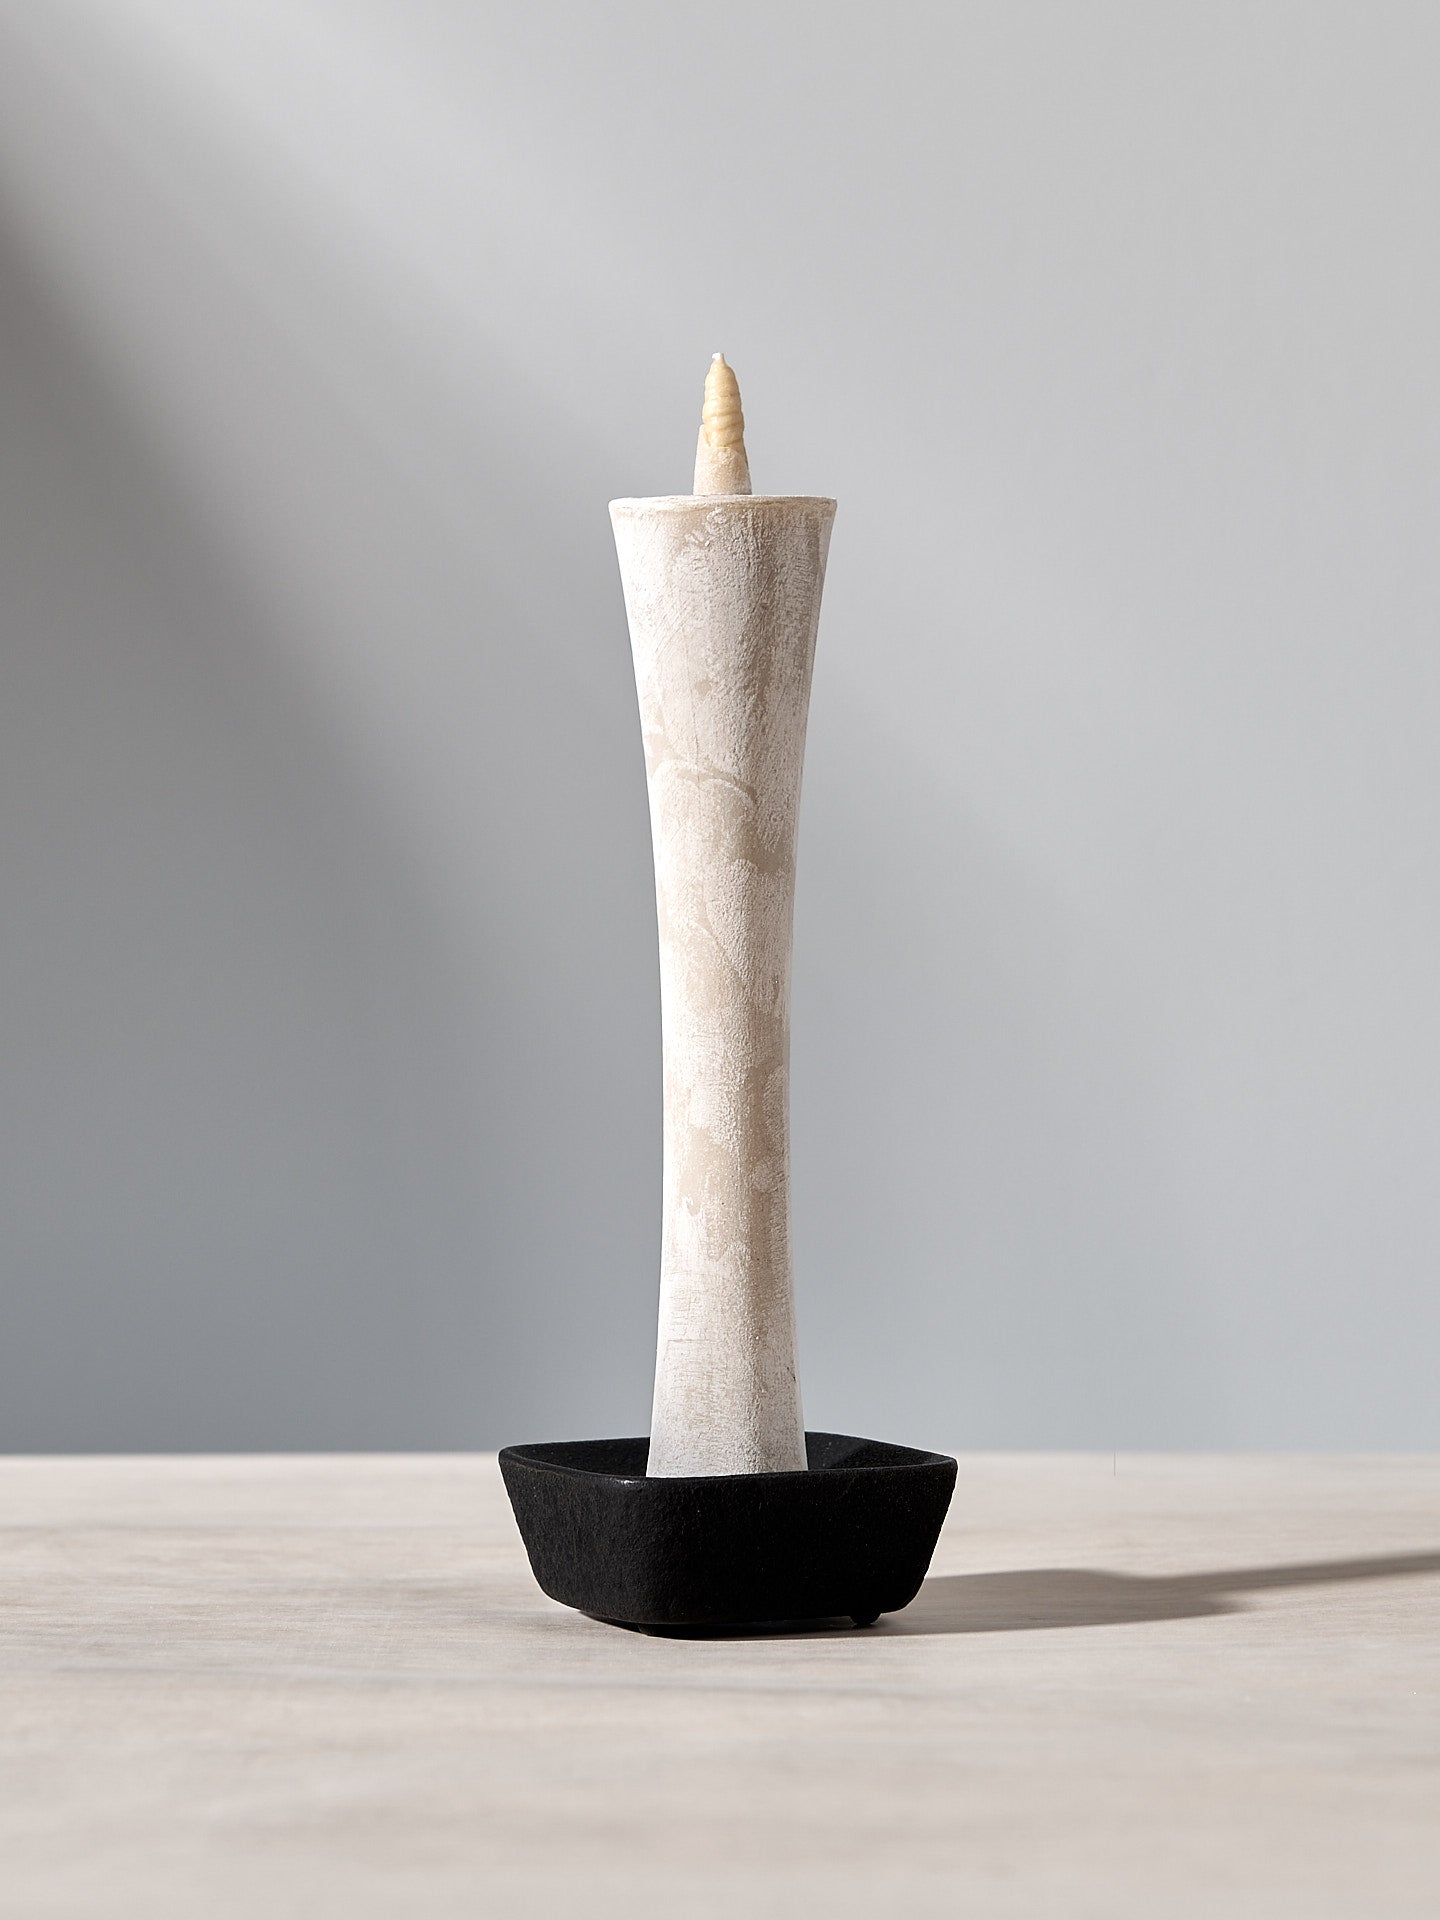 A Takazawa IKARI Candle – Large (box of 1) is sitting on a table with a black base.